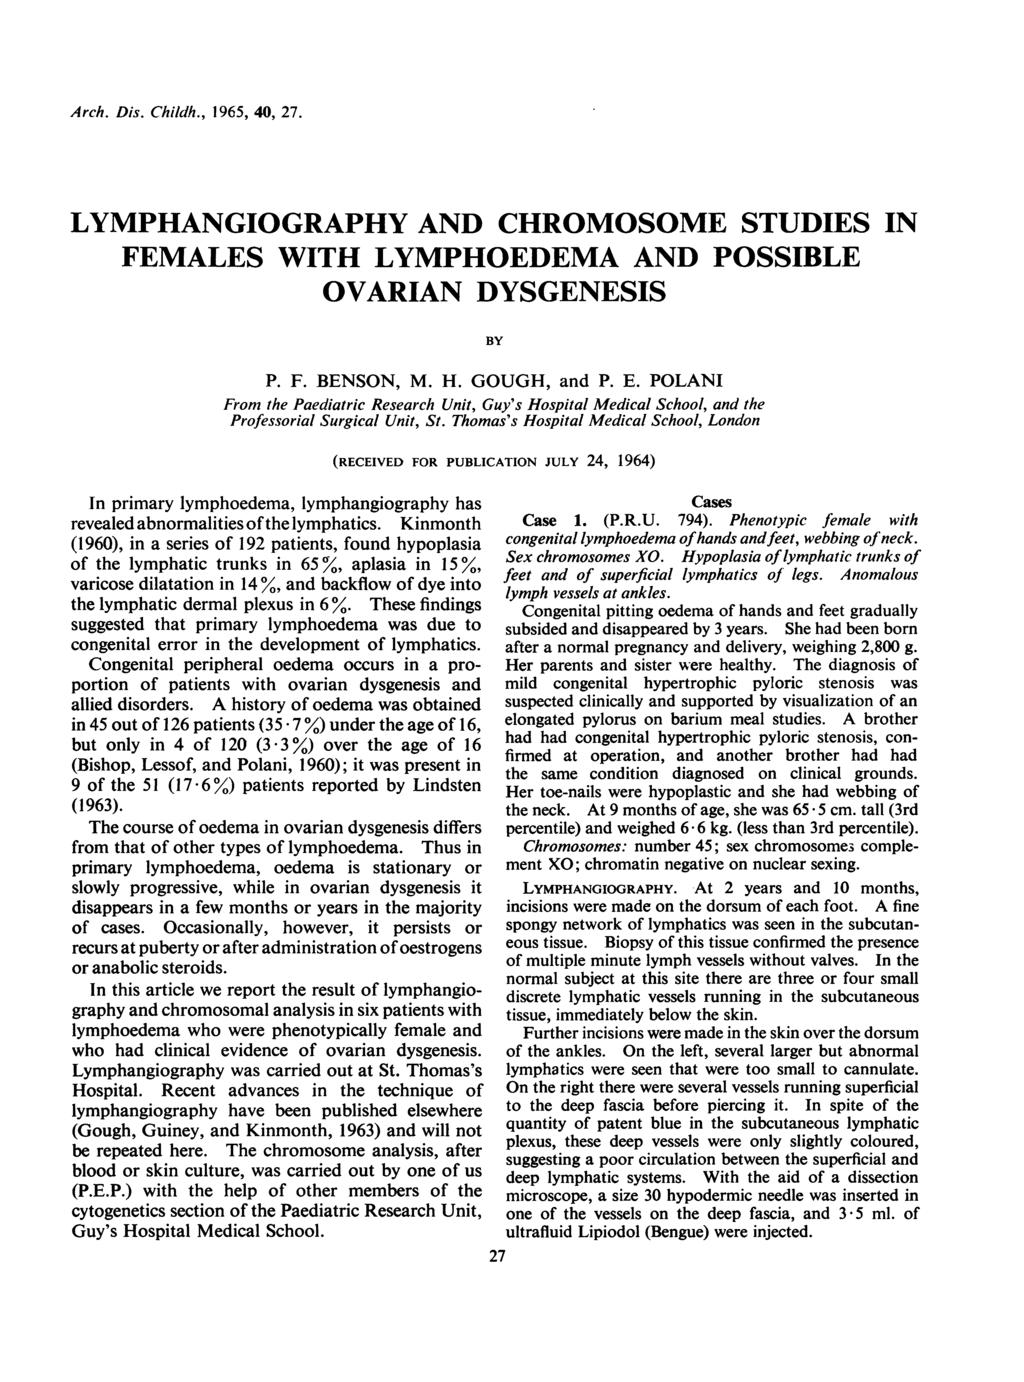 Arch. Dis. Childh., 1965, 40, 27. LYMPHANGIOGRAPHY AND CHROMOSOME STUDIES IN FEMALES WITH LYMPHOEDEMA AND POSSIBLE OVARIAN DYSGENESIS BY P. F. BENSON, M. H. GOUGH, and P. E.